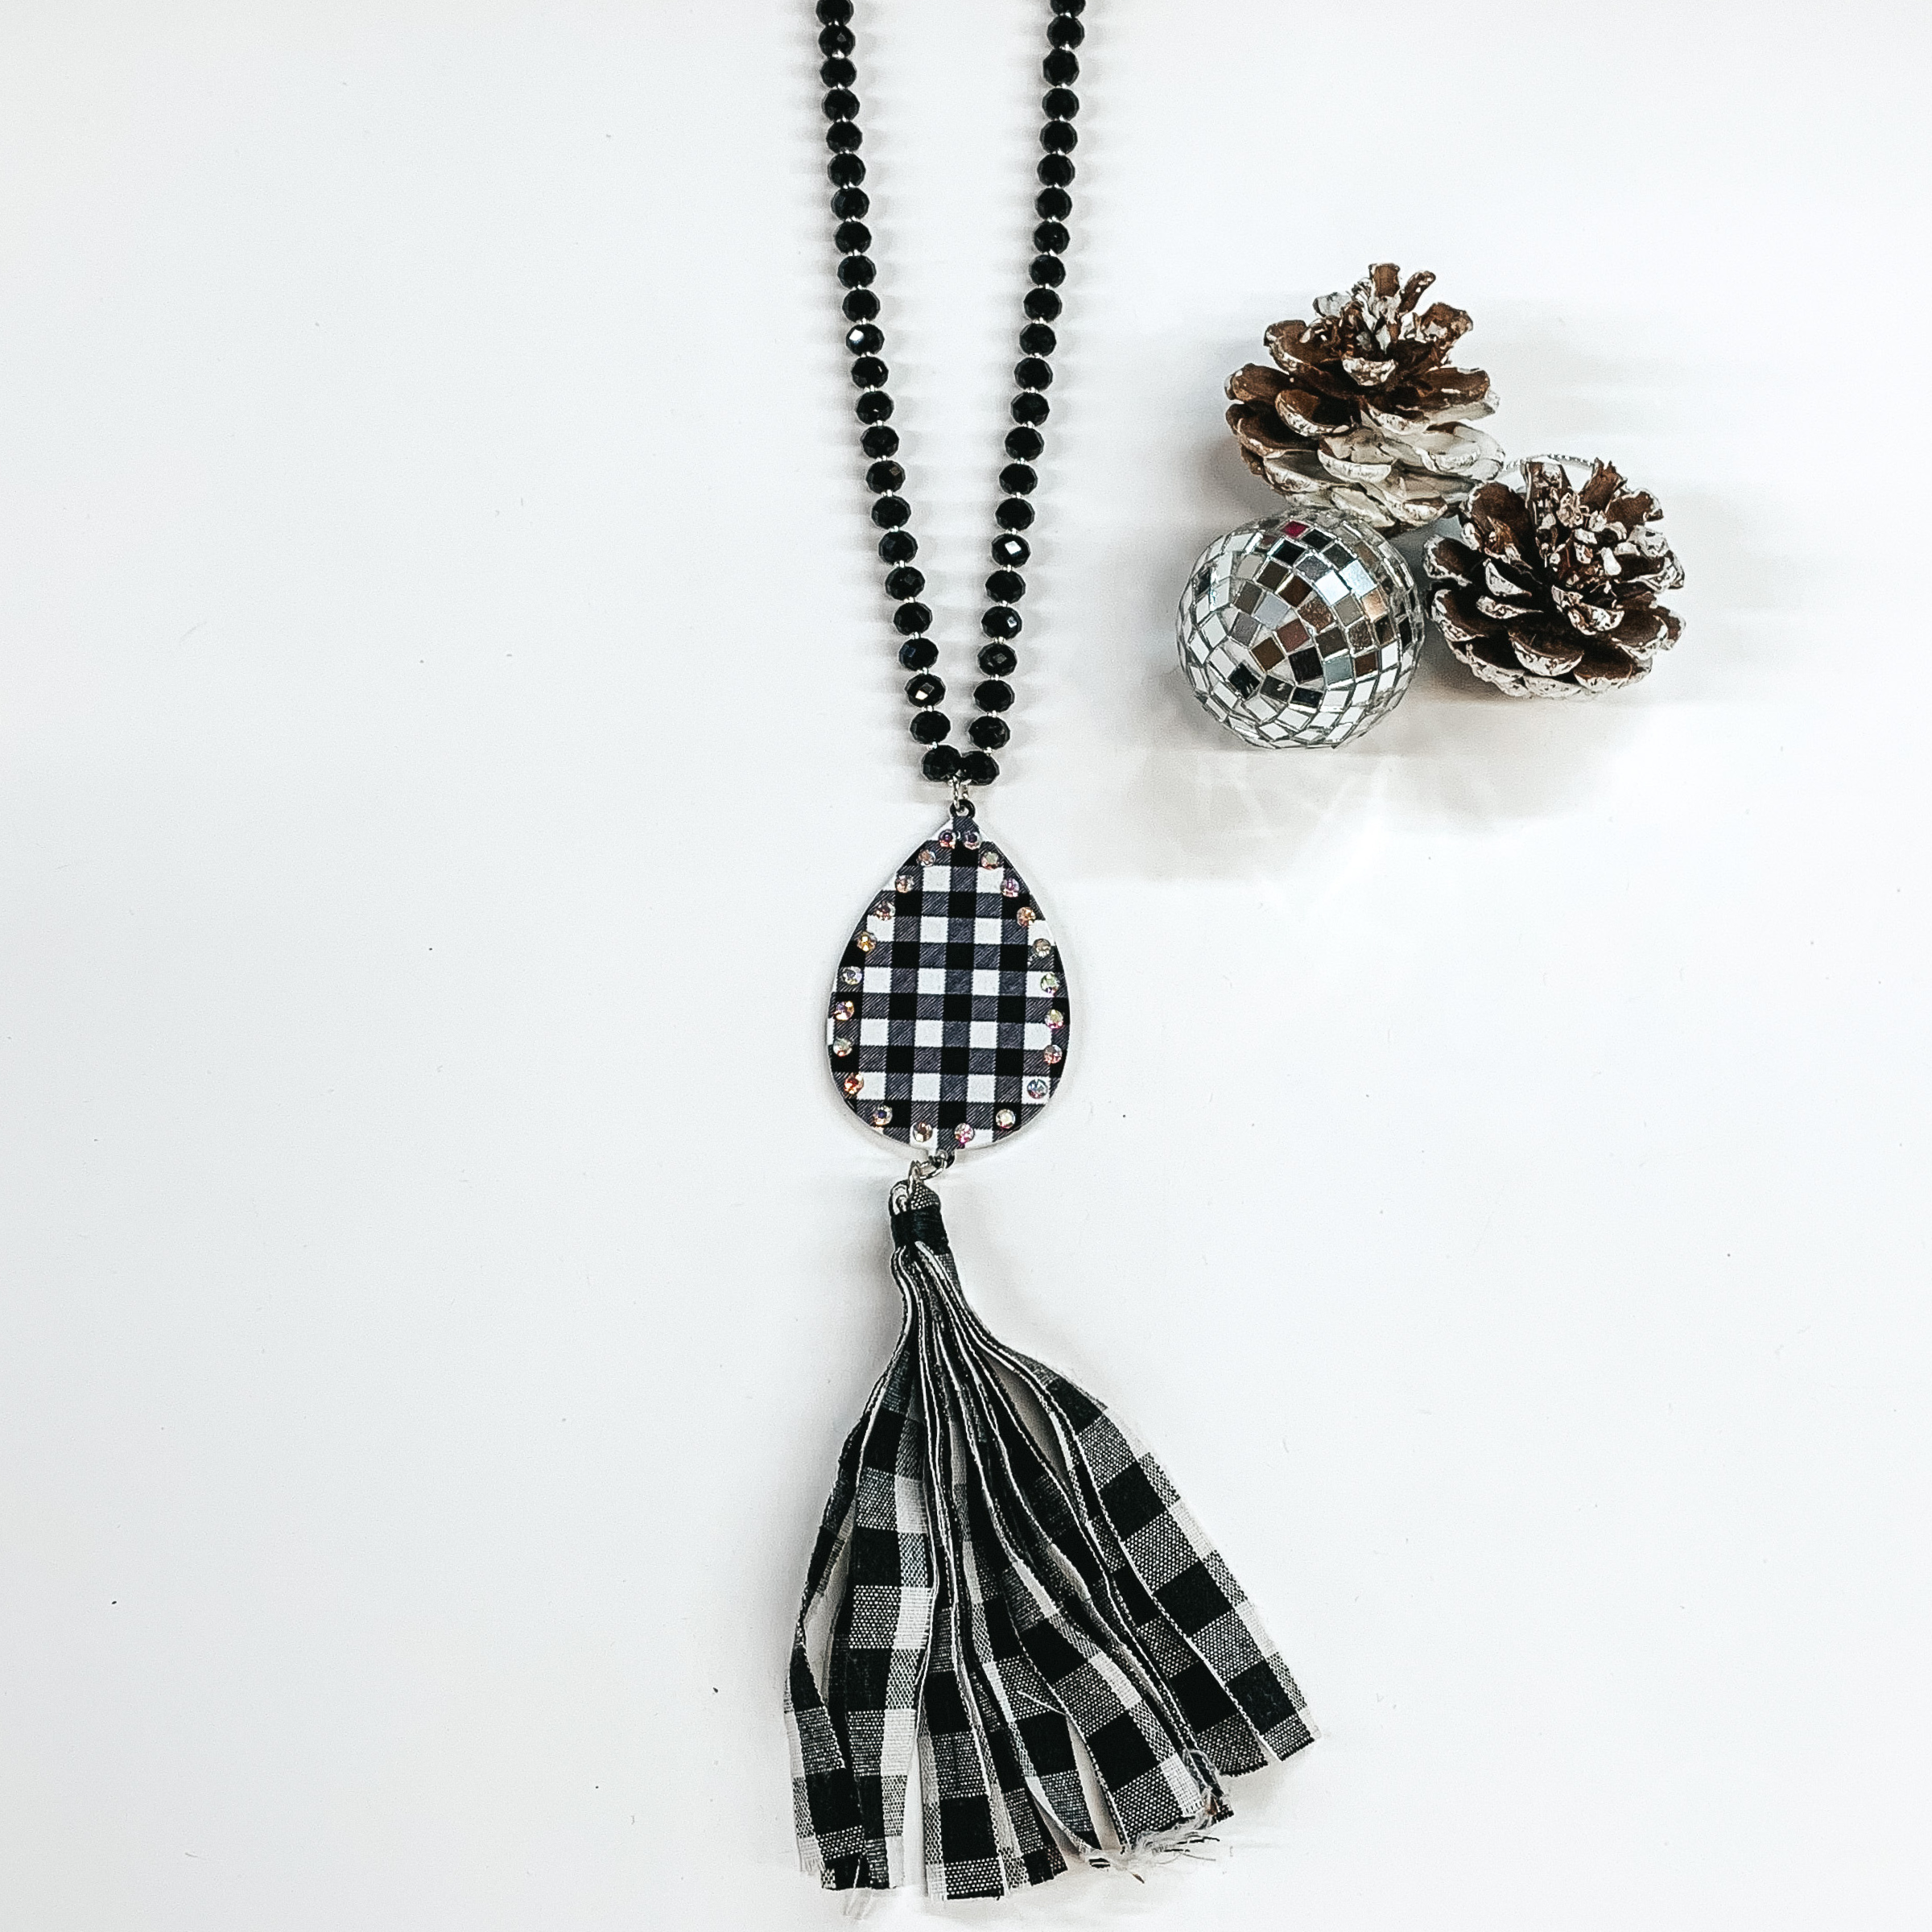 Crystal Beaded Necklace with Buffalo Plaid Teardrop Pendant and Tassel in Black - Giddy Up Glamour Boutique